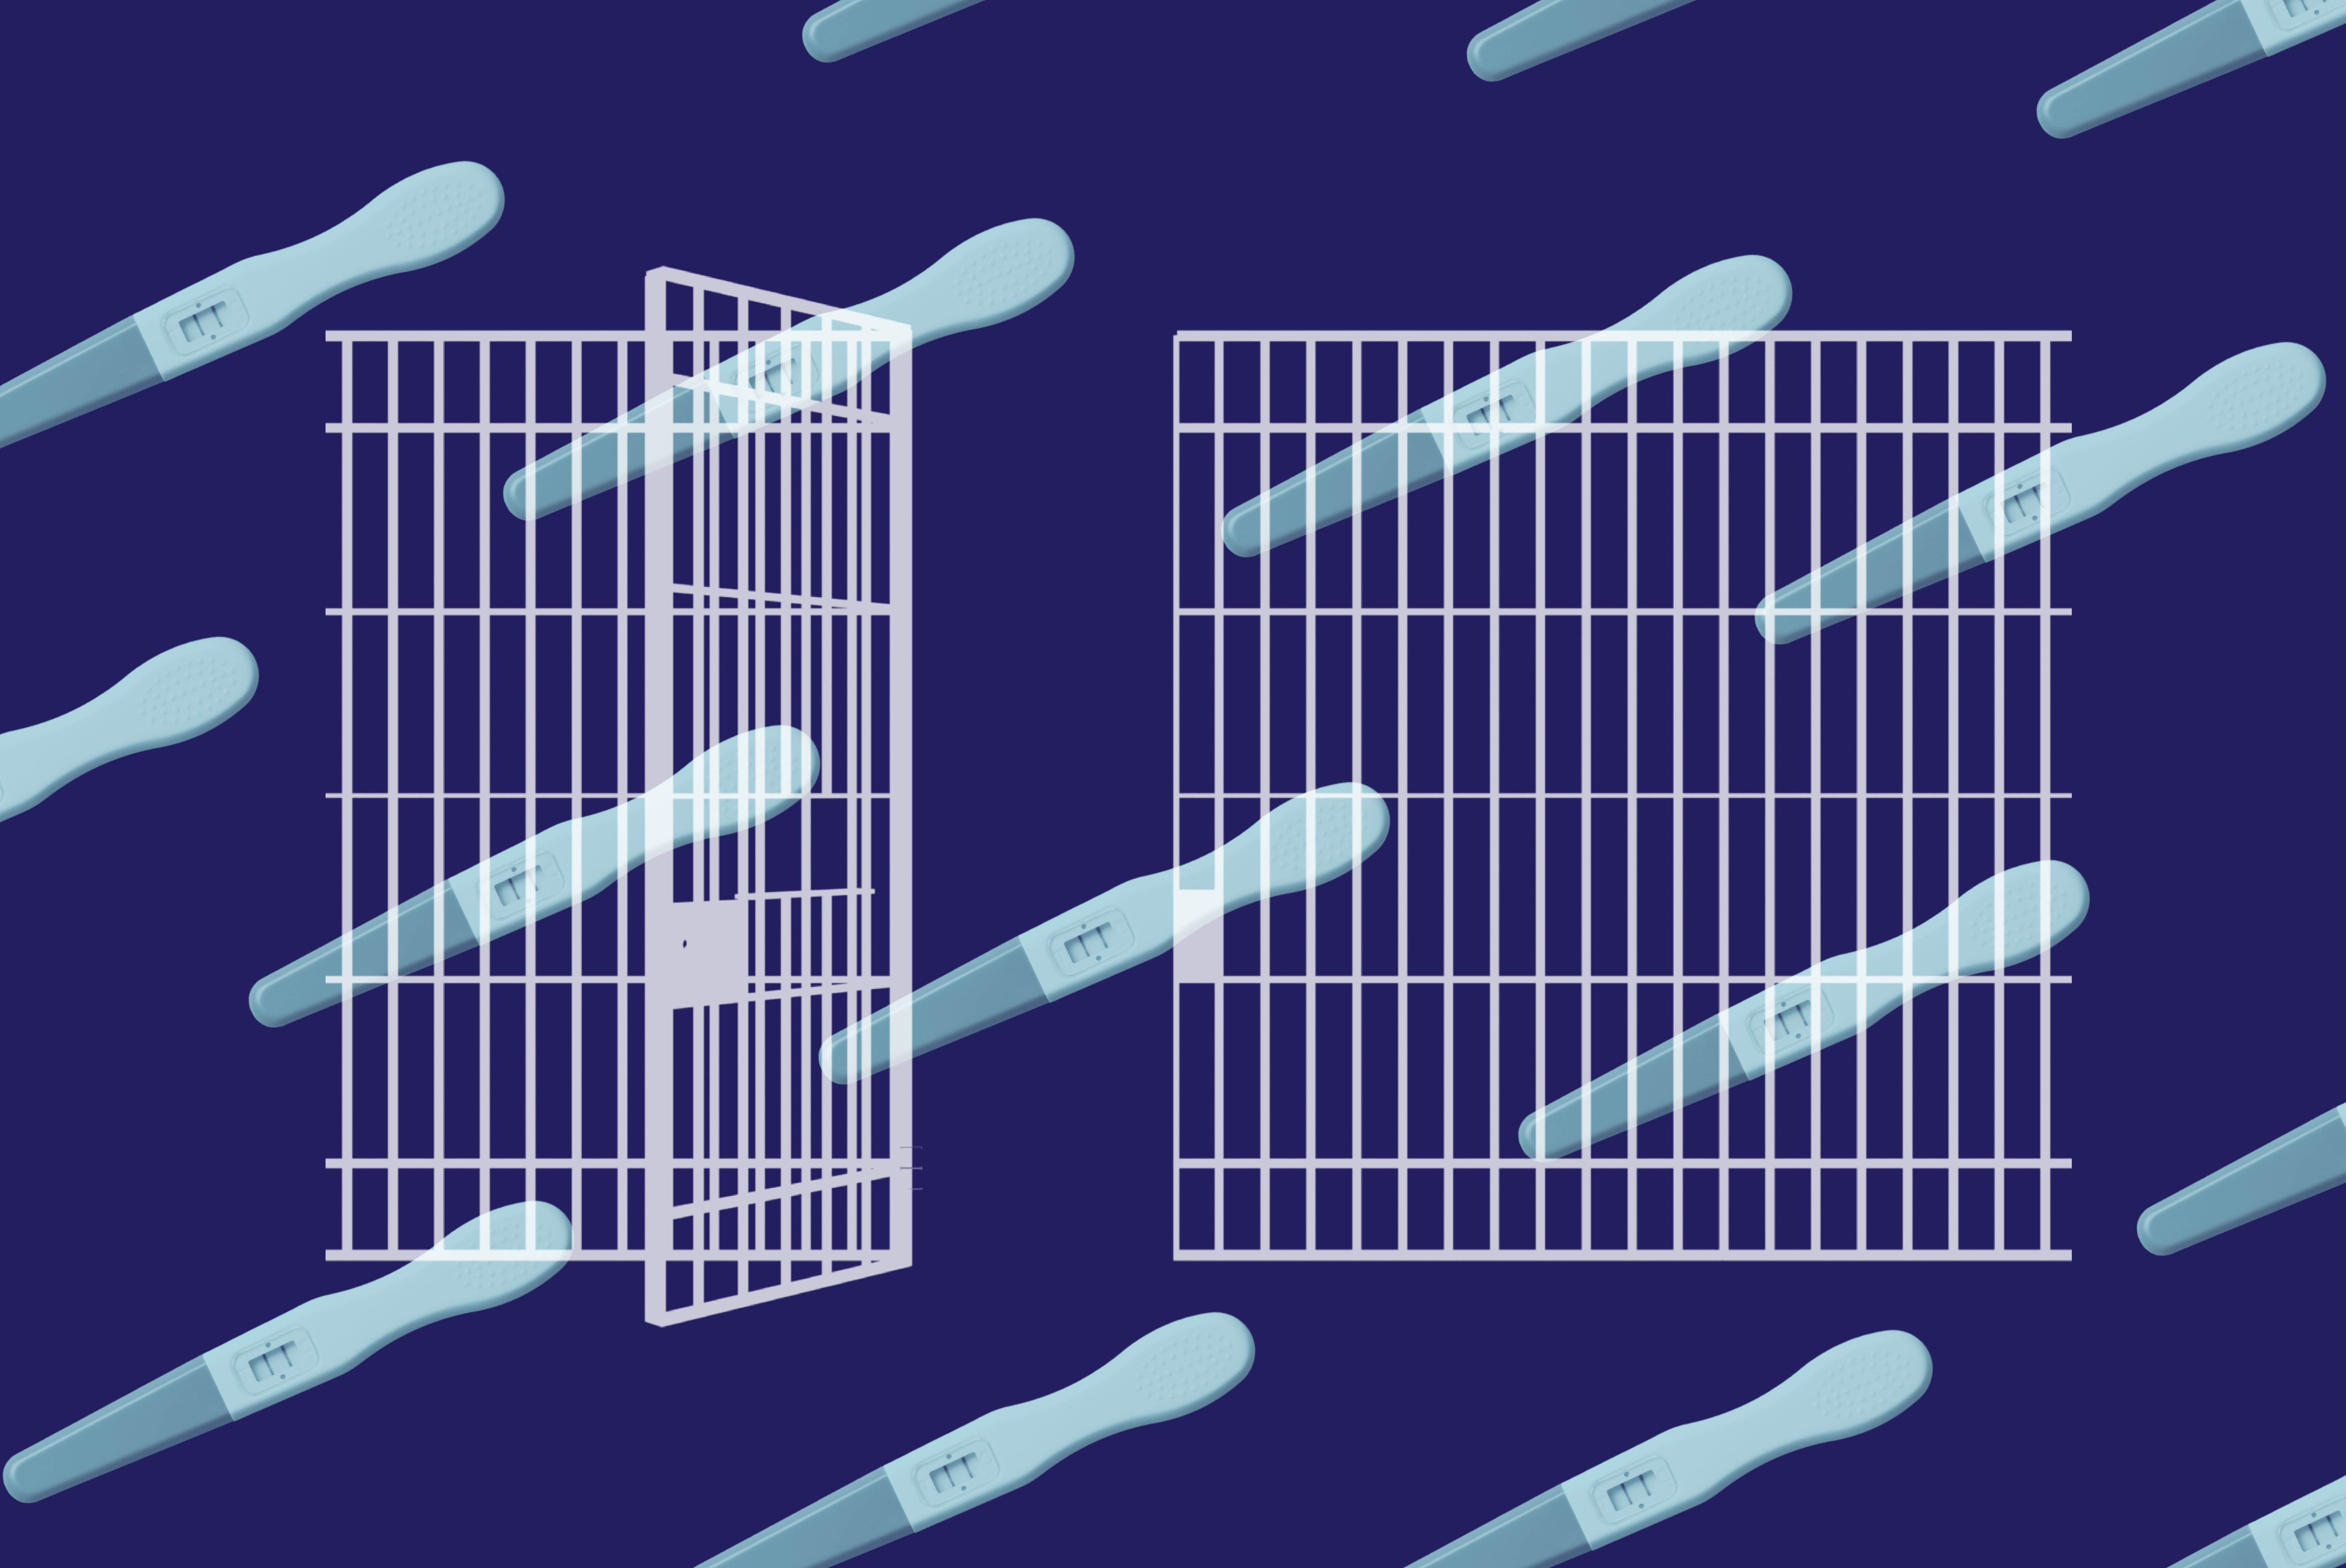 Navy background with light blue pregnancy tests. White jail bars overlaying